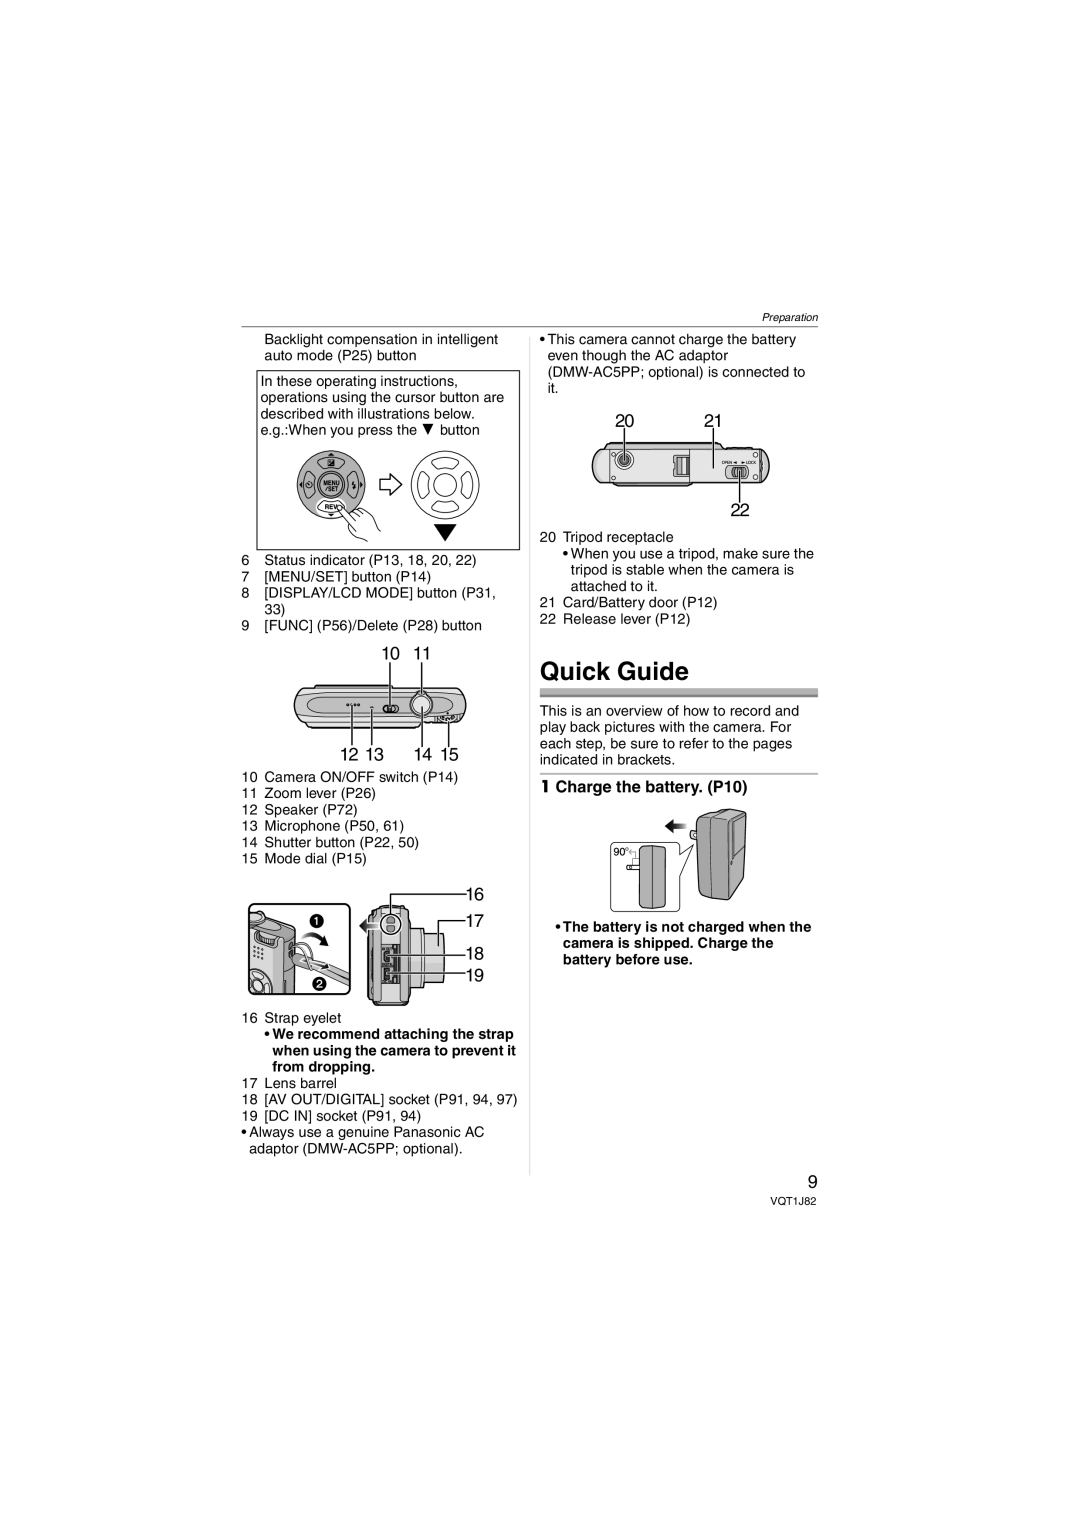 Panasonic DMC-FX33 operating instructions Quick Guide, Charge the battery. P10 